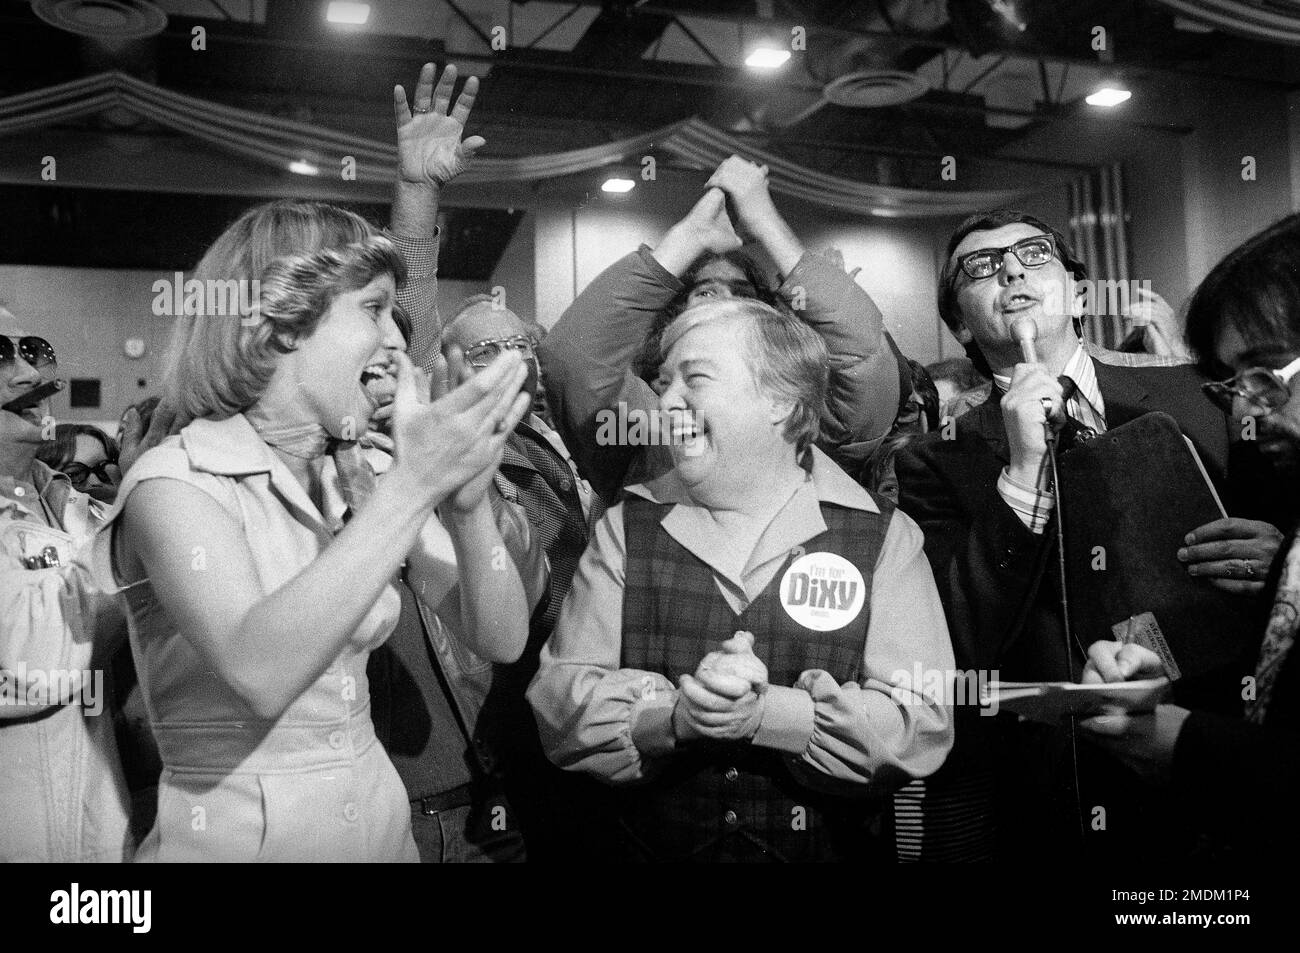 Democrat Dixy Lee Ray was the center of attention in a victory party at ...